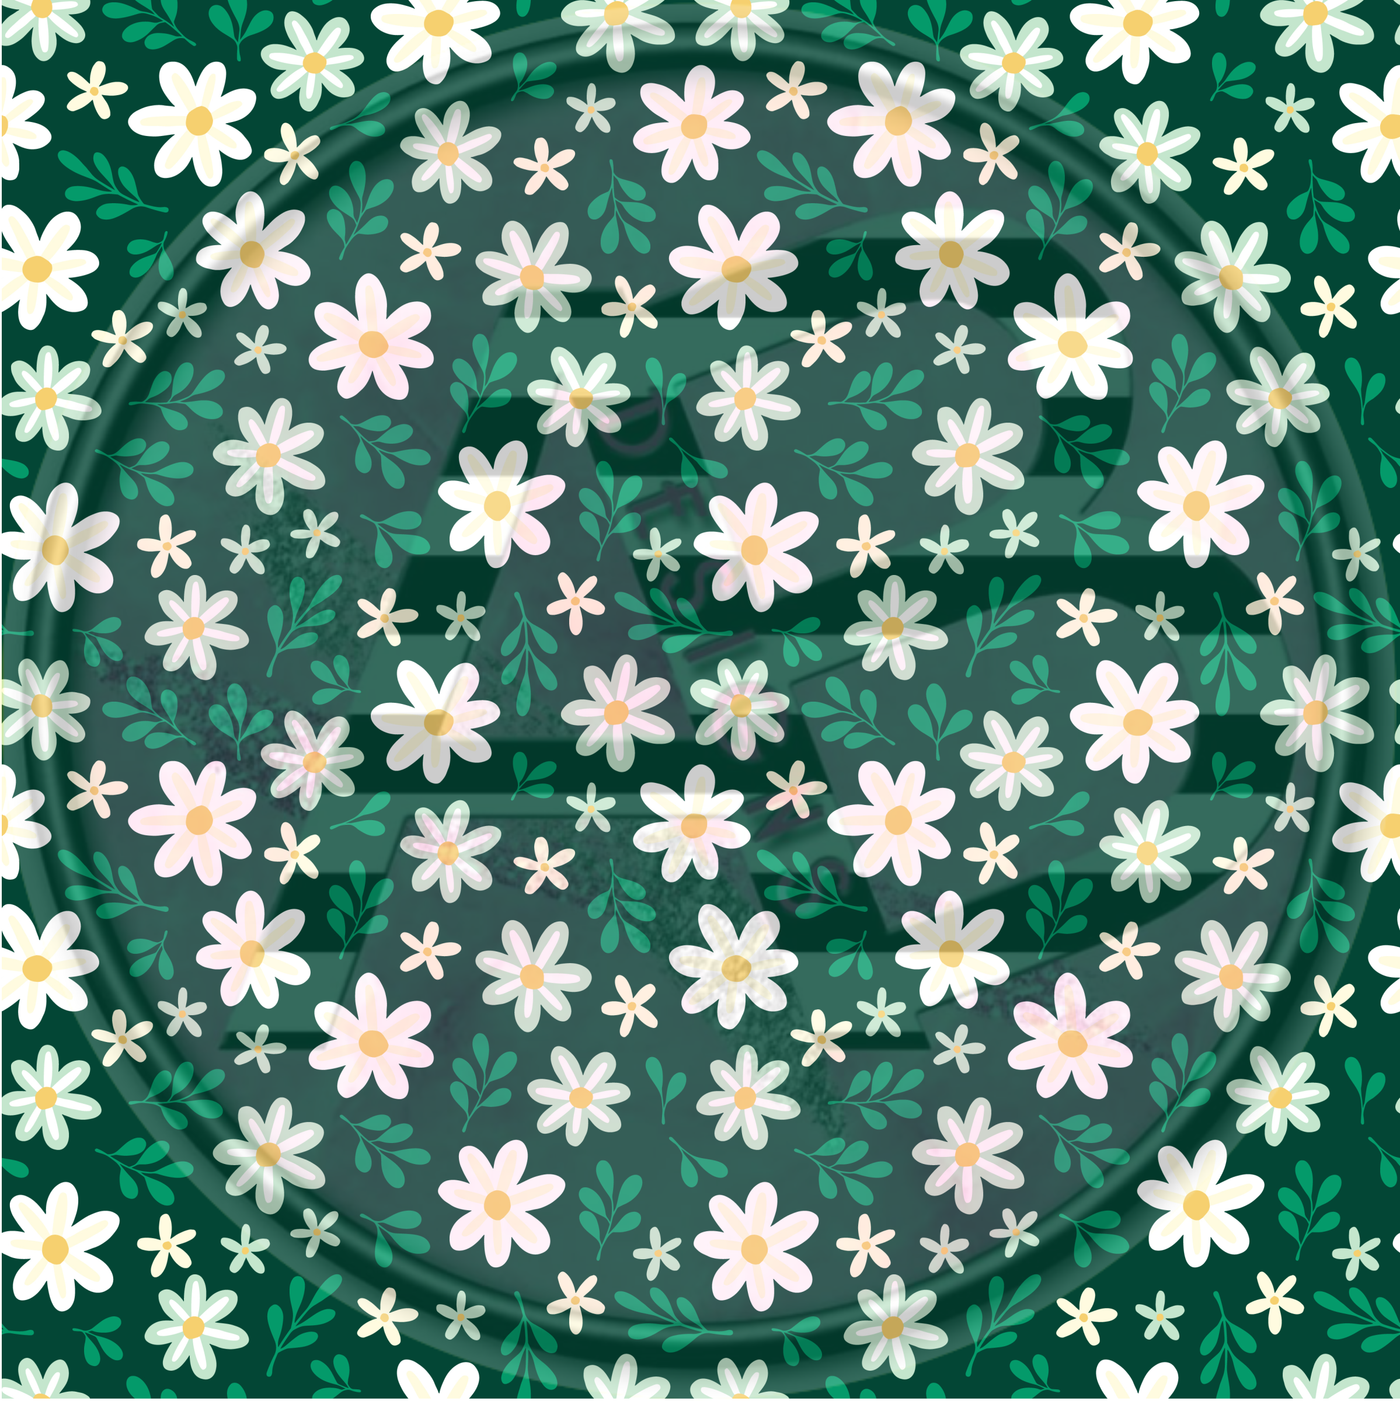 Adhesive Patterned Vinyl - St. Patrick's Day 22